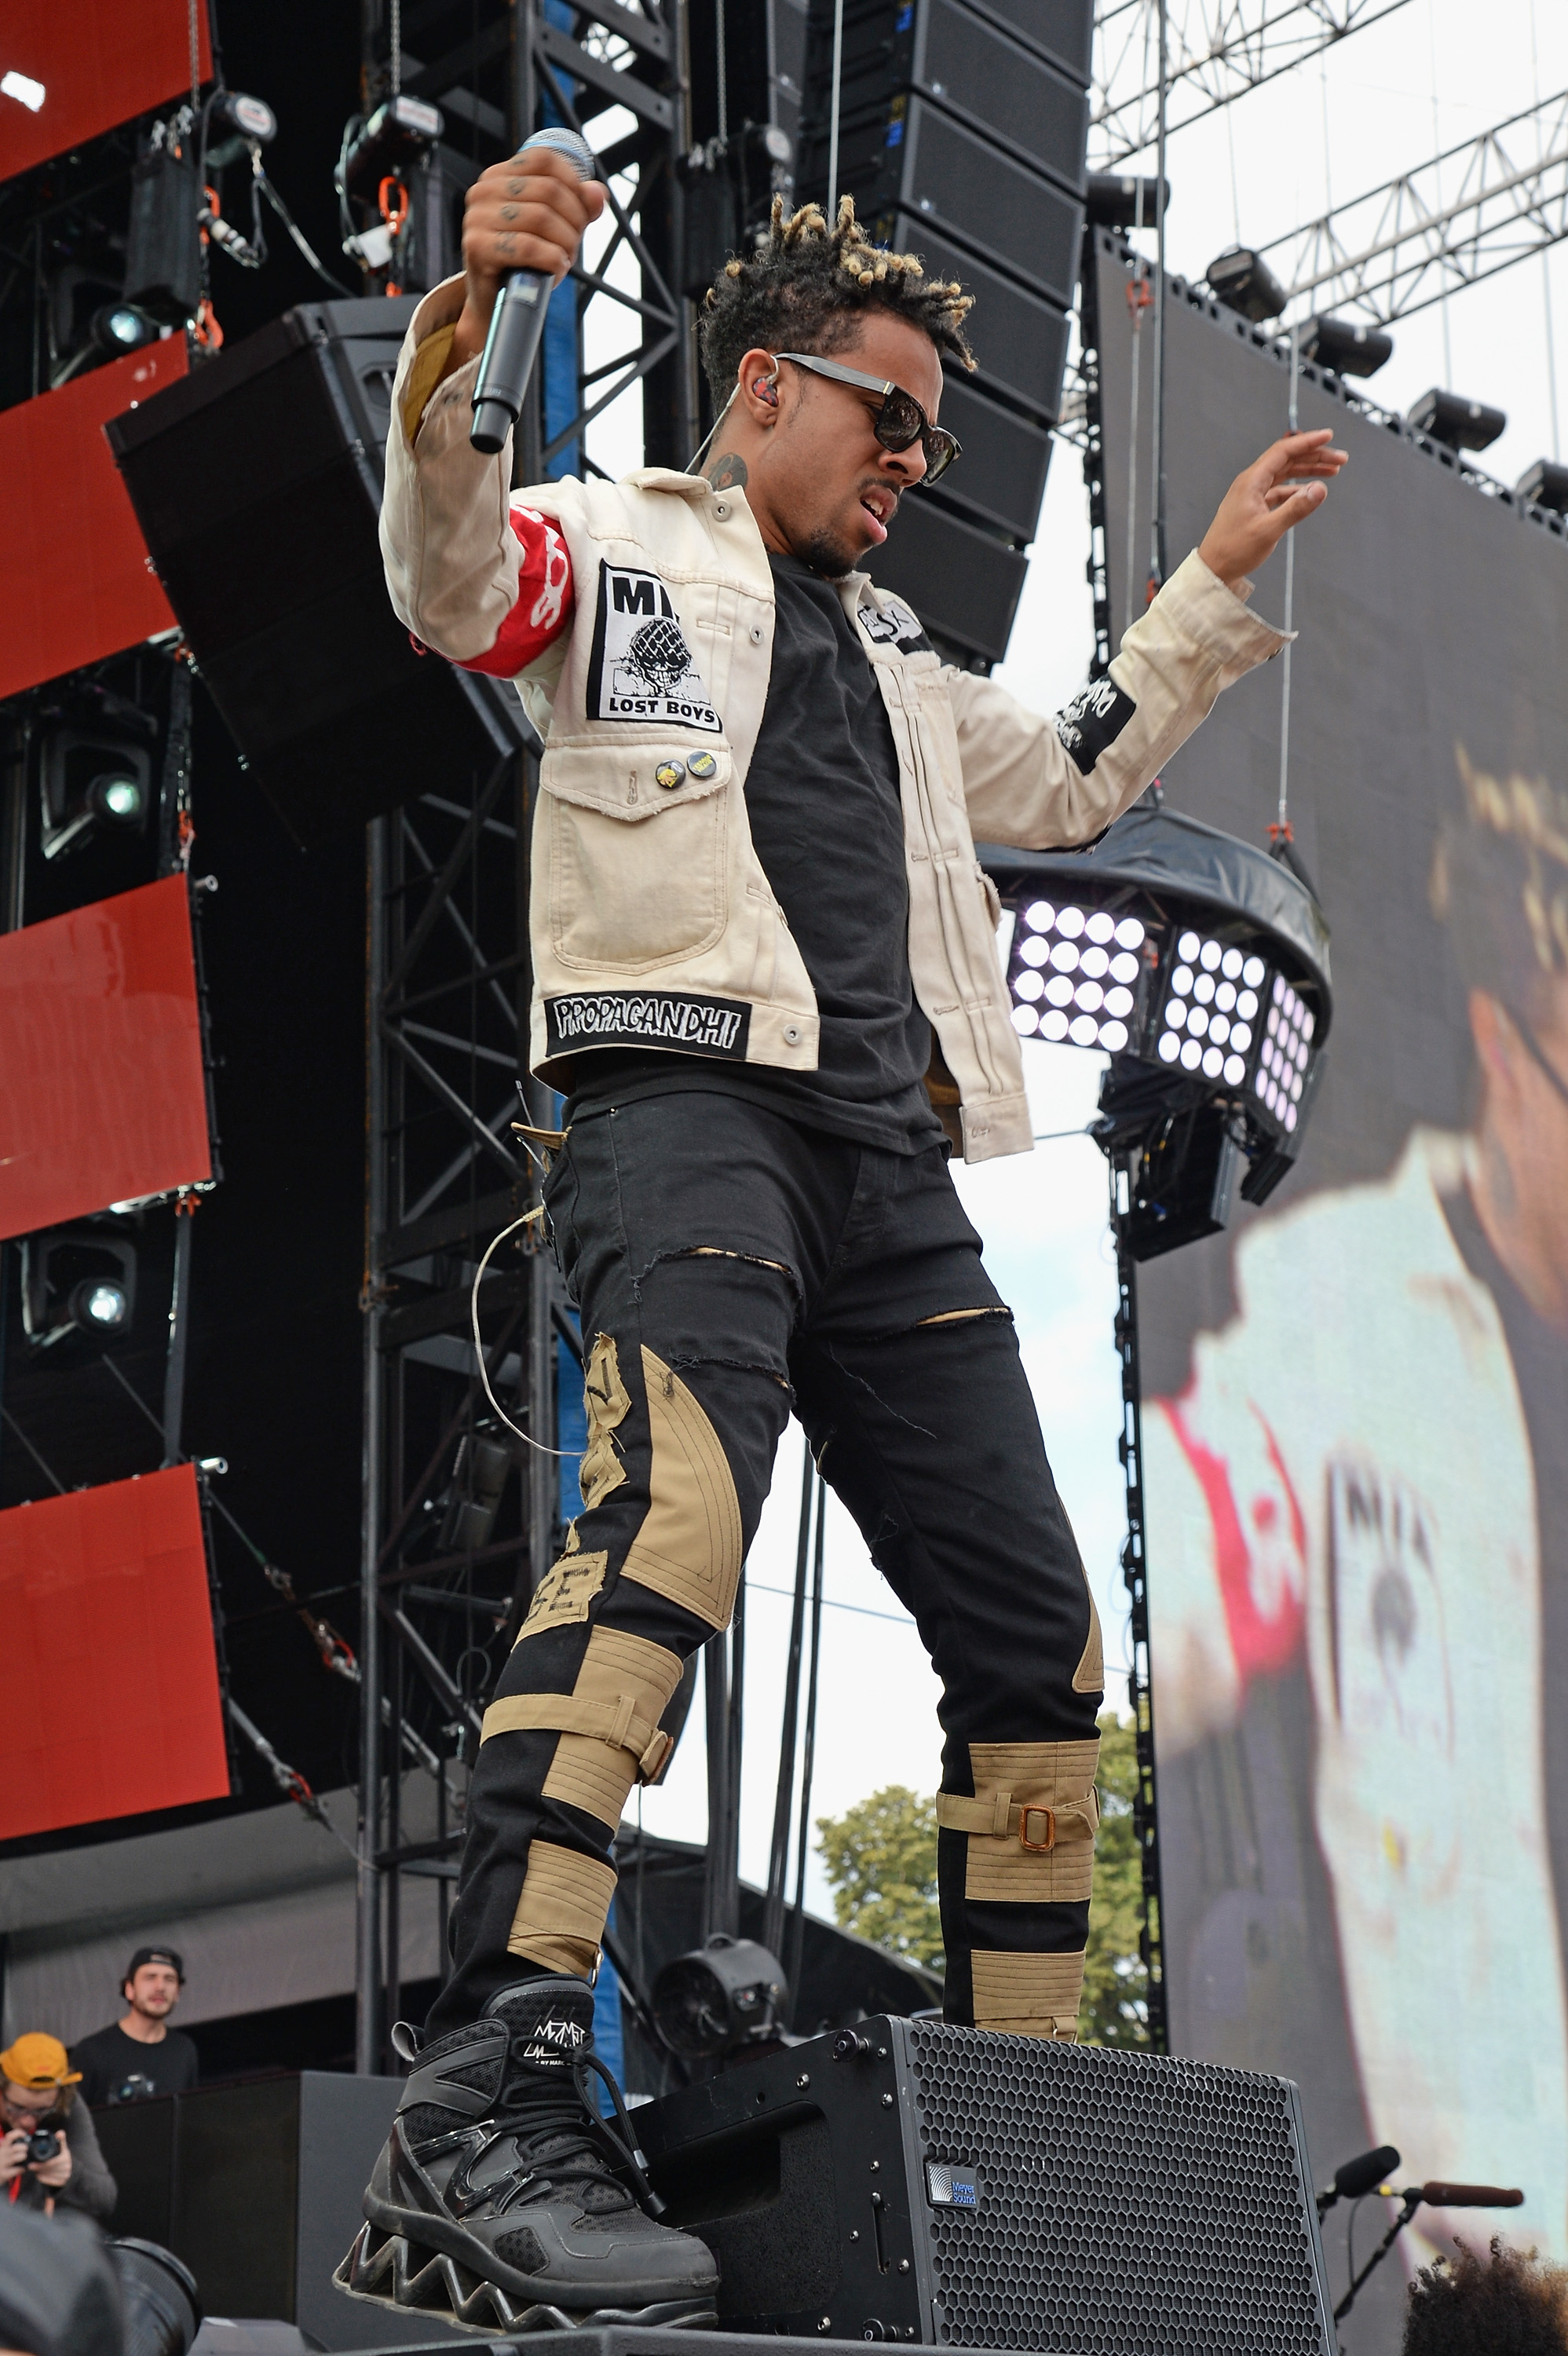 PHILADELPHIA, PA - SEPTEMBER 05: Vic Mensa performs onstage during the 2015 Budweiser Made in America Festival at Benjamin Franklin Parkway on September 5, 2015 in Philadelphia, Pennsylvania. (Photo by Kevin Mazur/Getty Images for Anheuser-Busch)